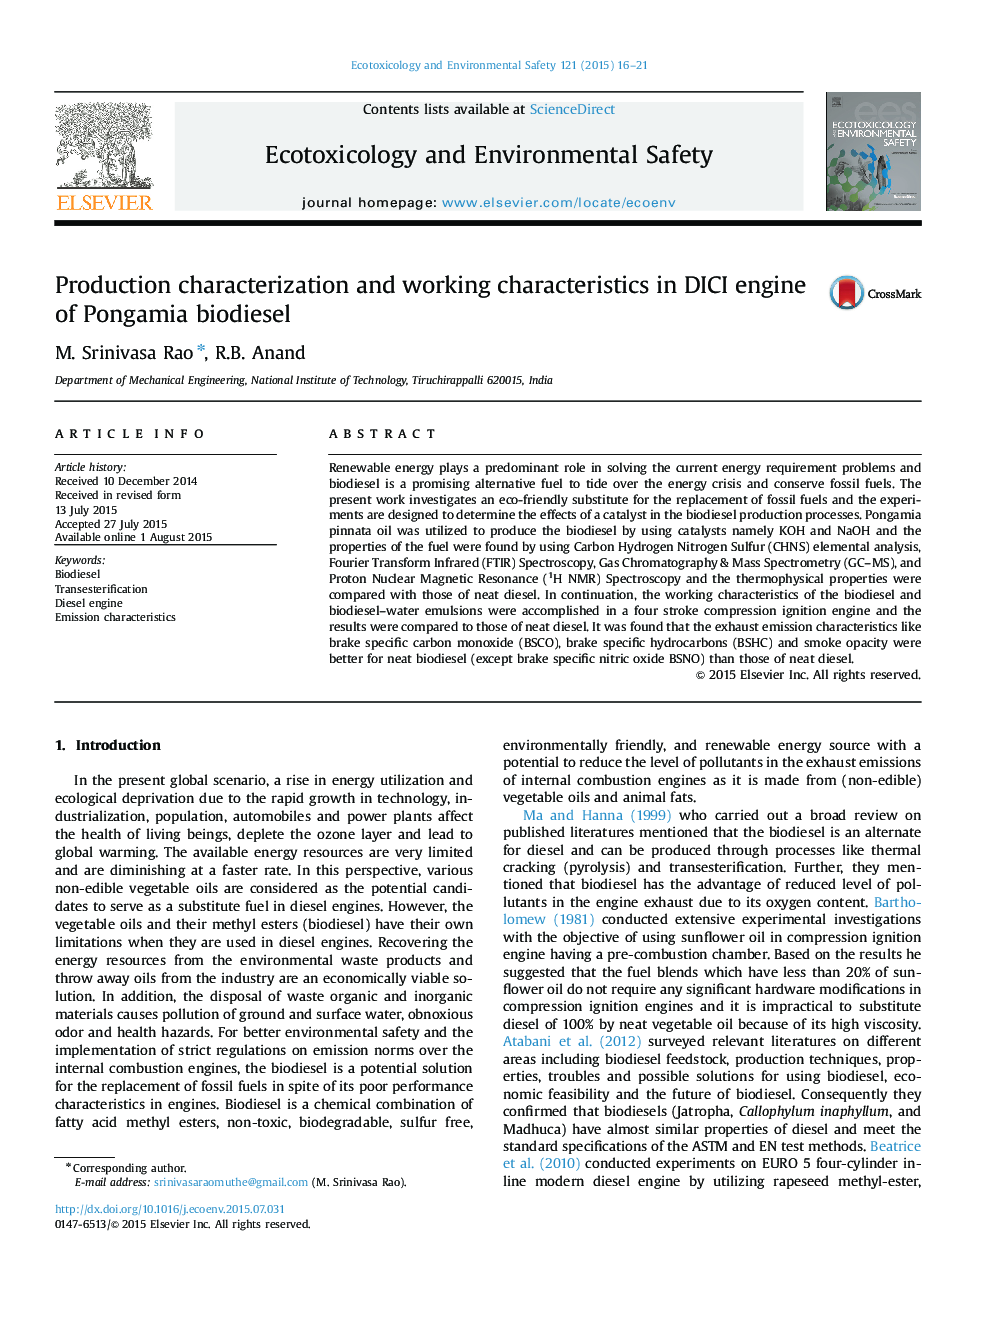 Production characterization and working characteristics in DICI engine of Pongamia biodiesel